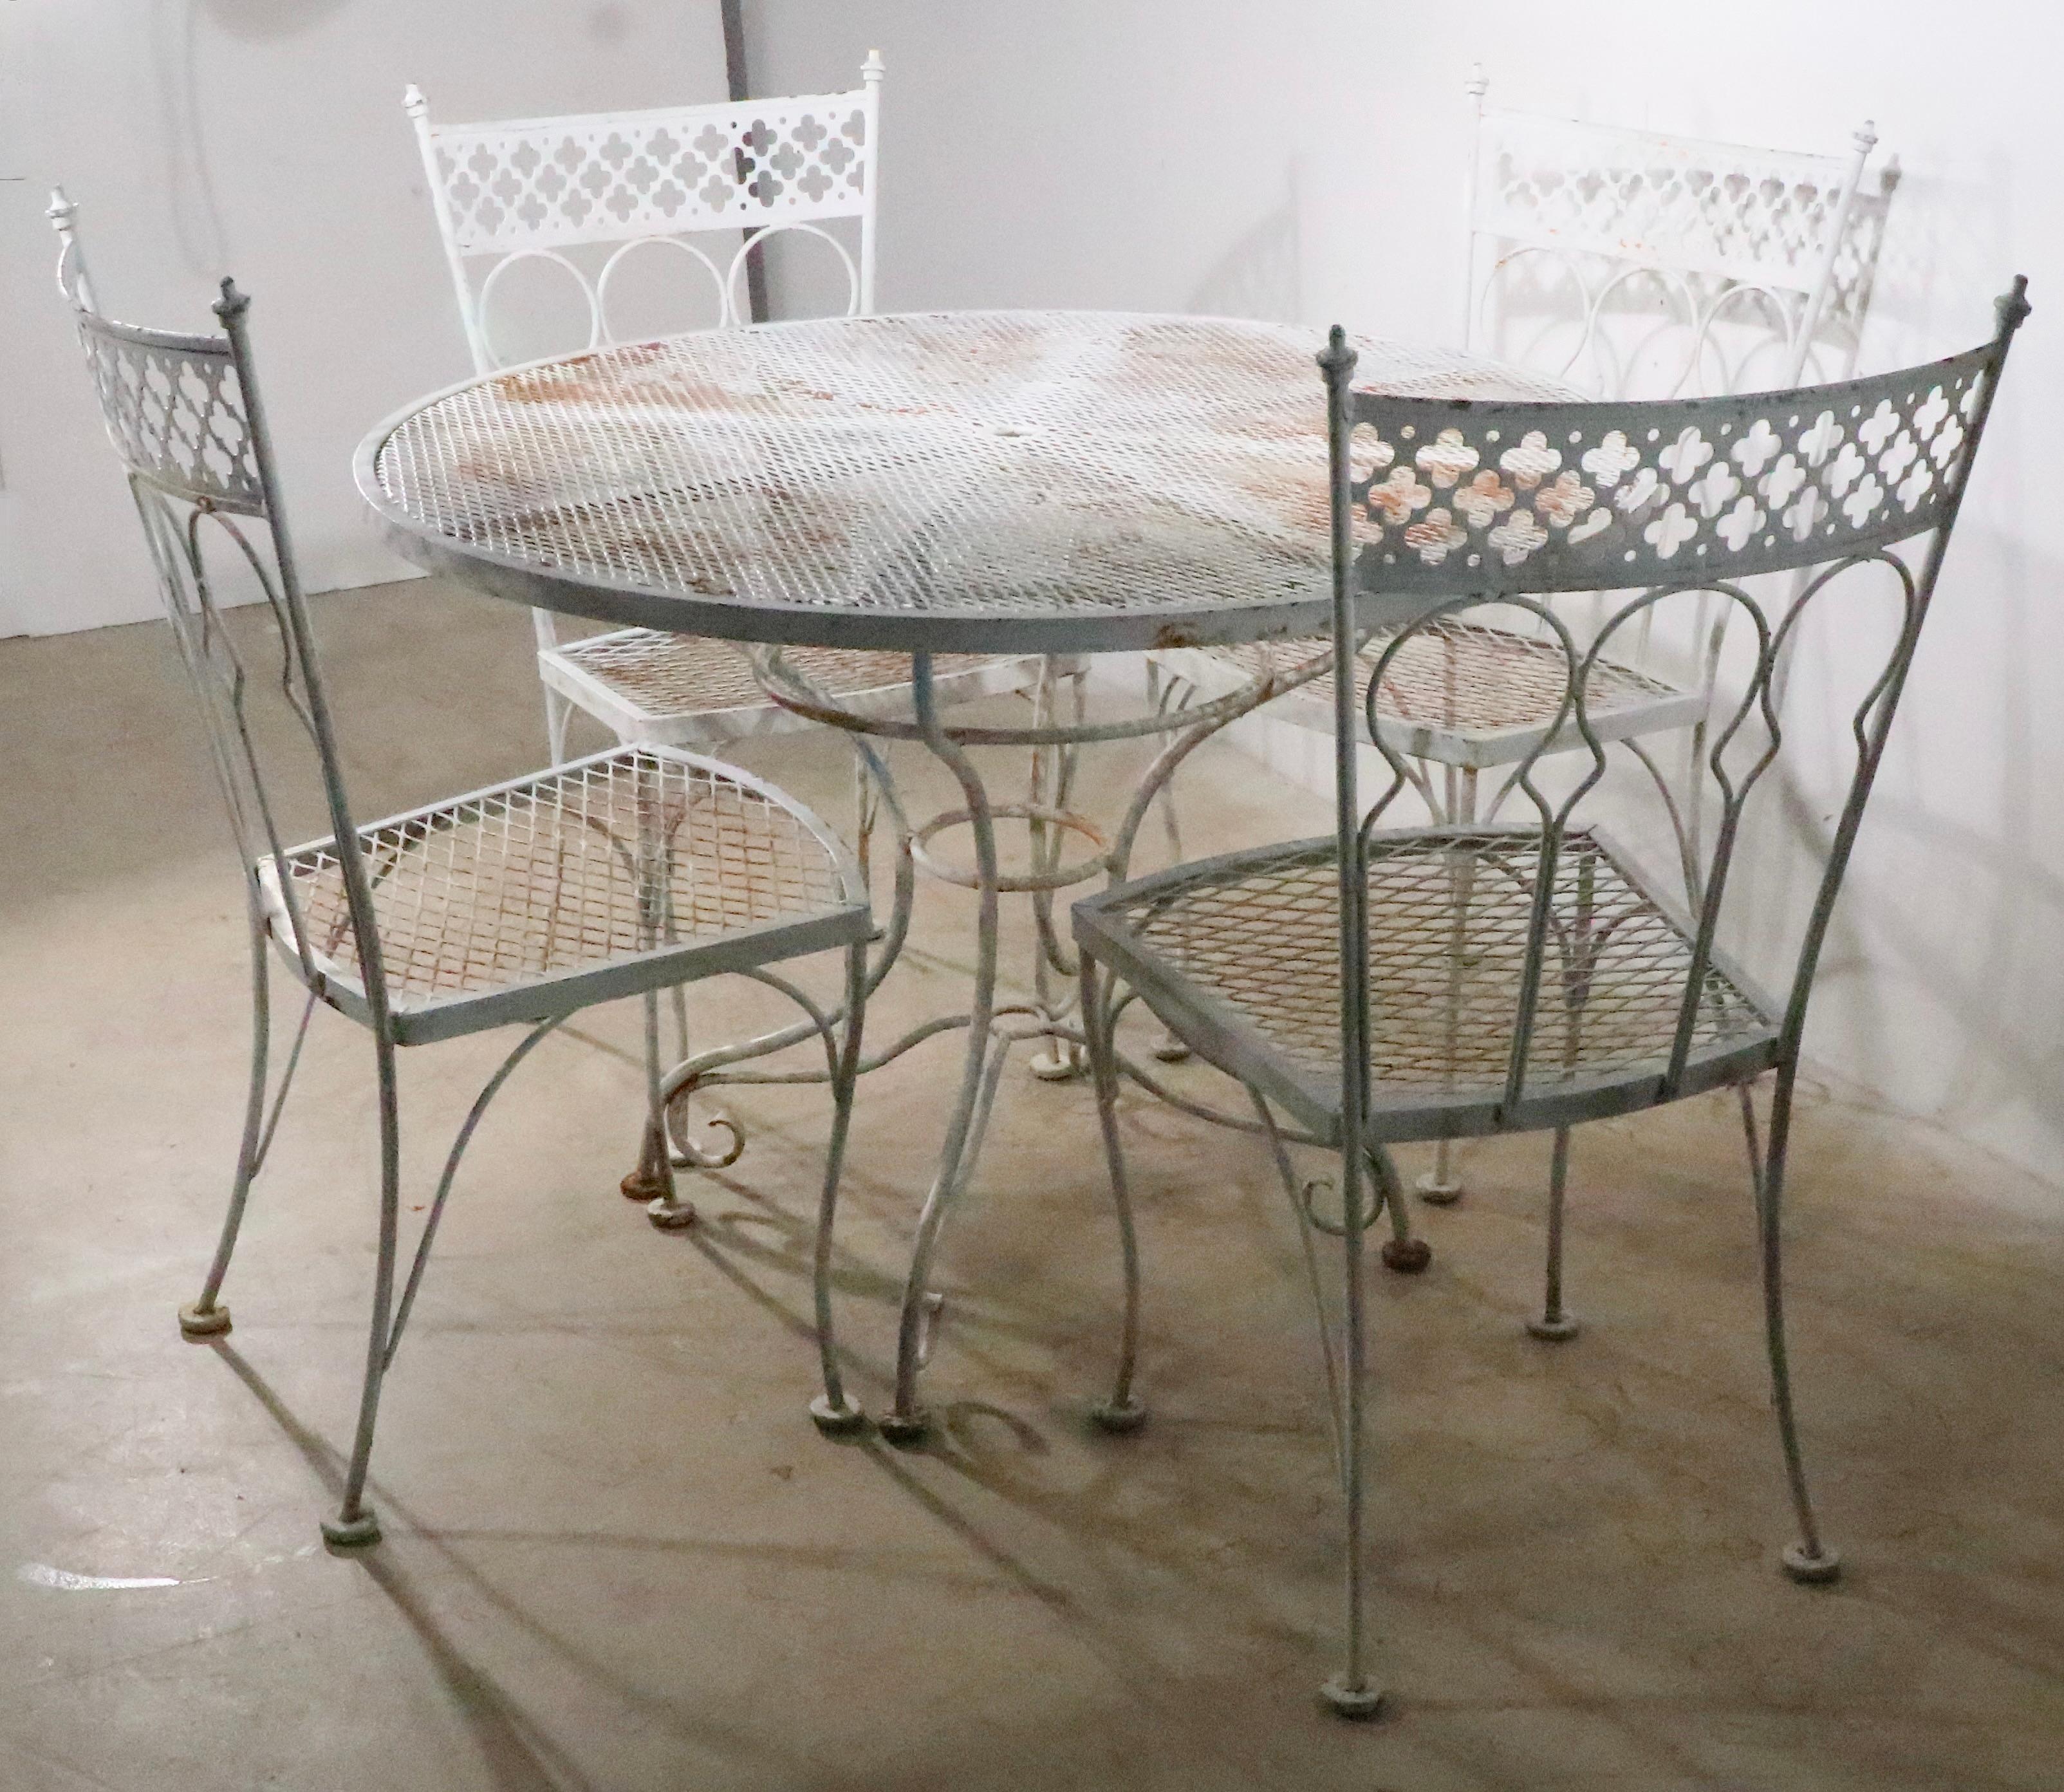 Rare garden, patio, poolside, sunroom dining set in the Taj Mahal pattern, by Salterini. The set includes the round dining table and its four original dining chairs. All pieces are in good, original estate condition, showing only cosmetic wear to